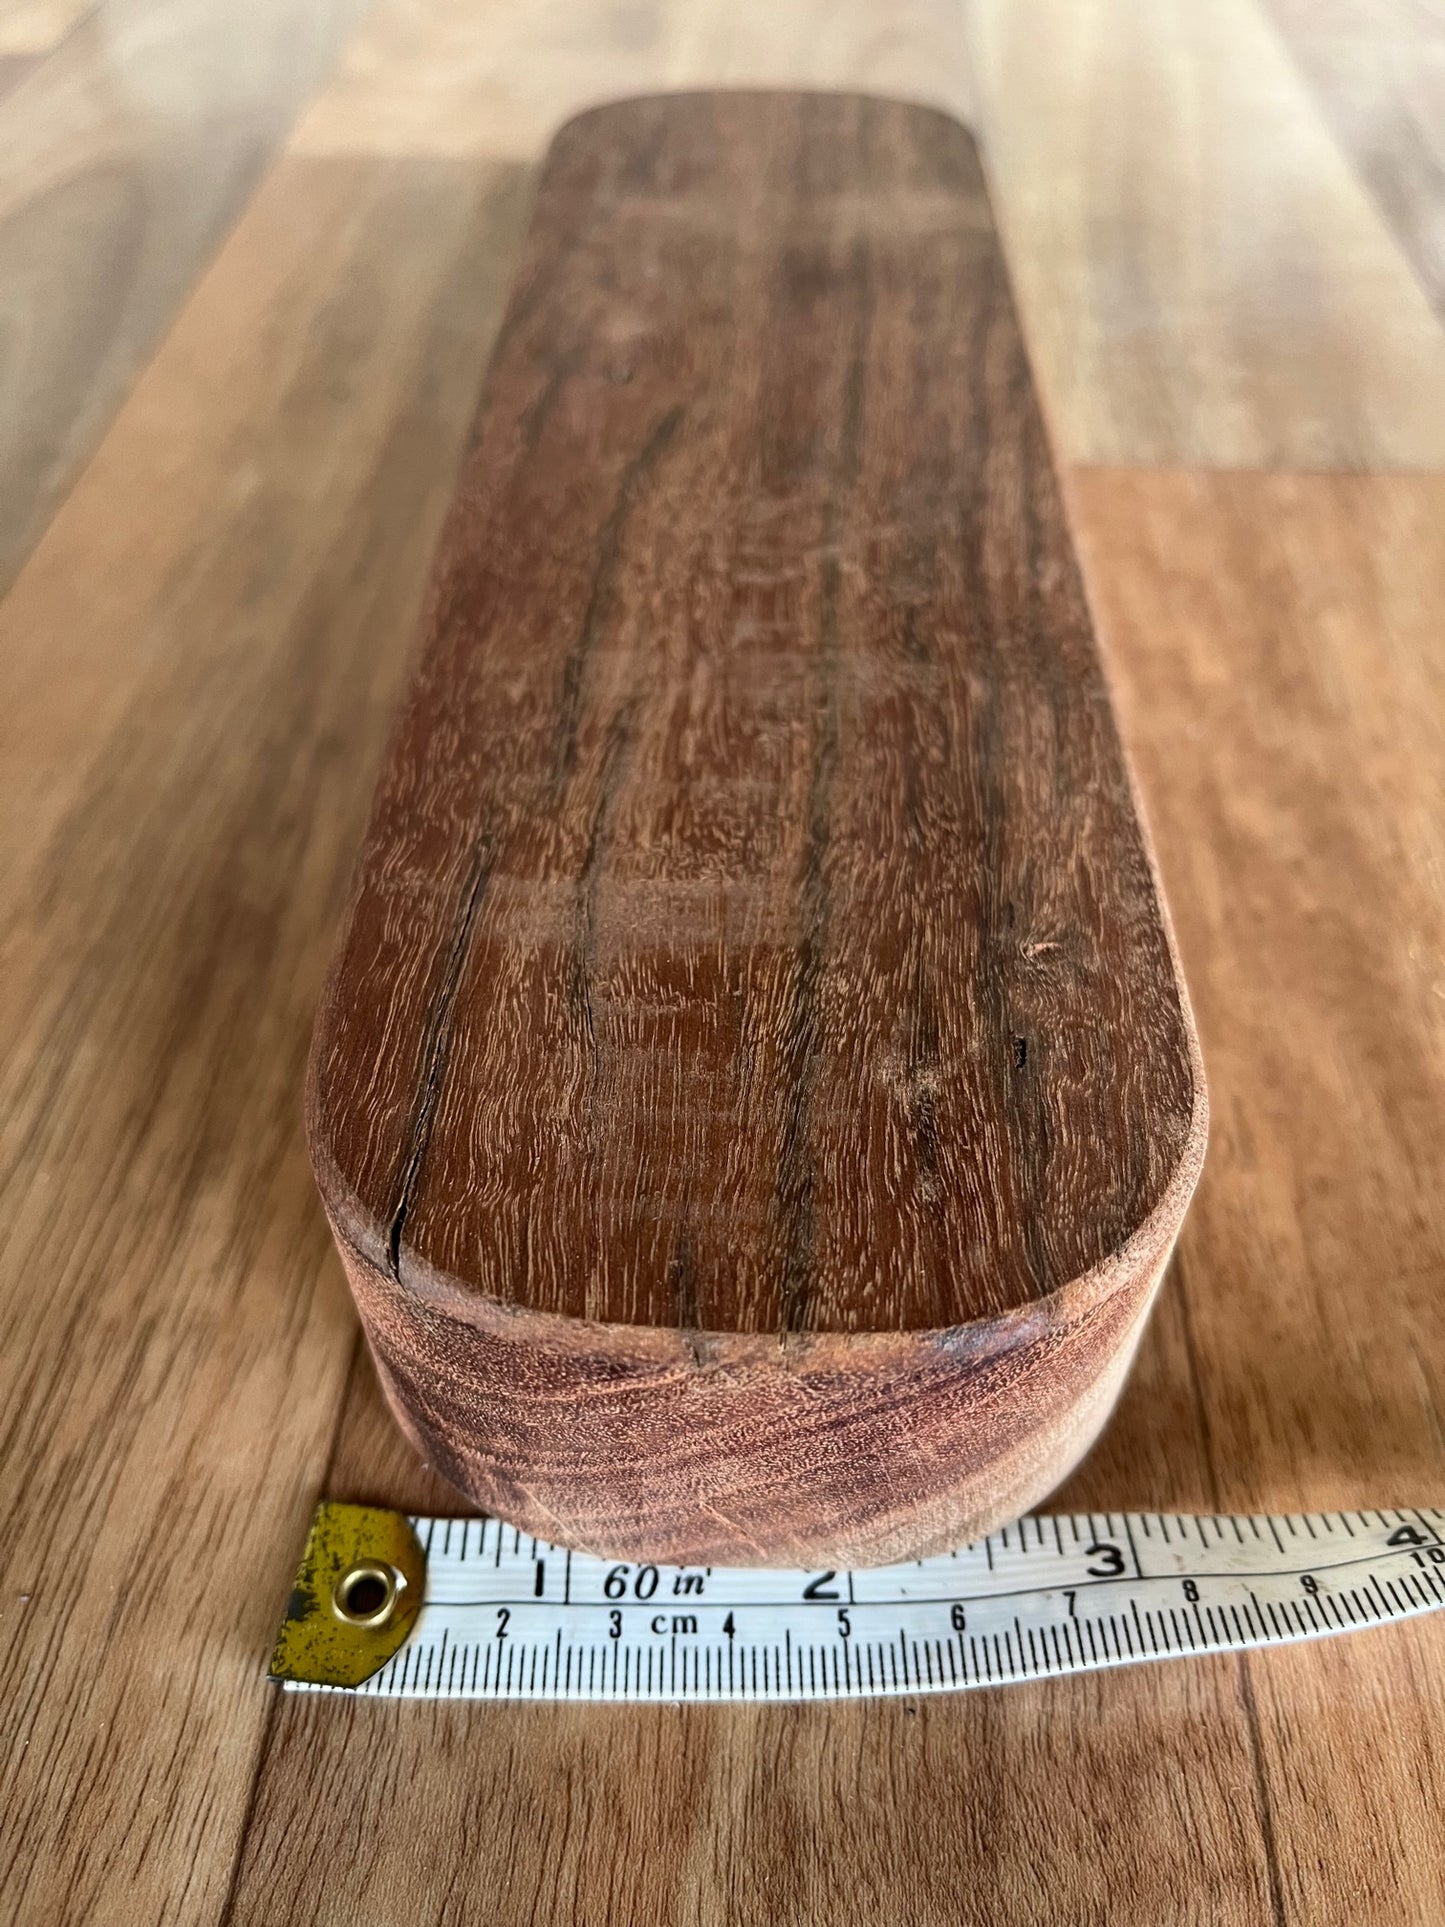 Recycled Timber (Jarrah) Quilter's Clapper